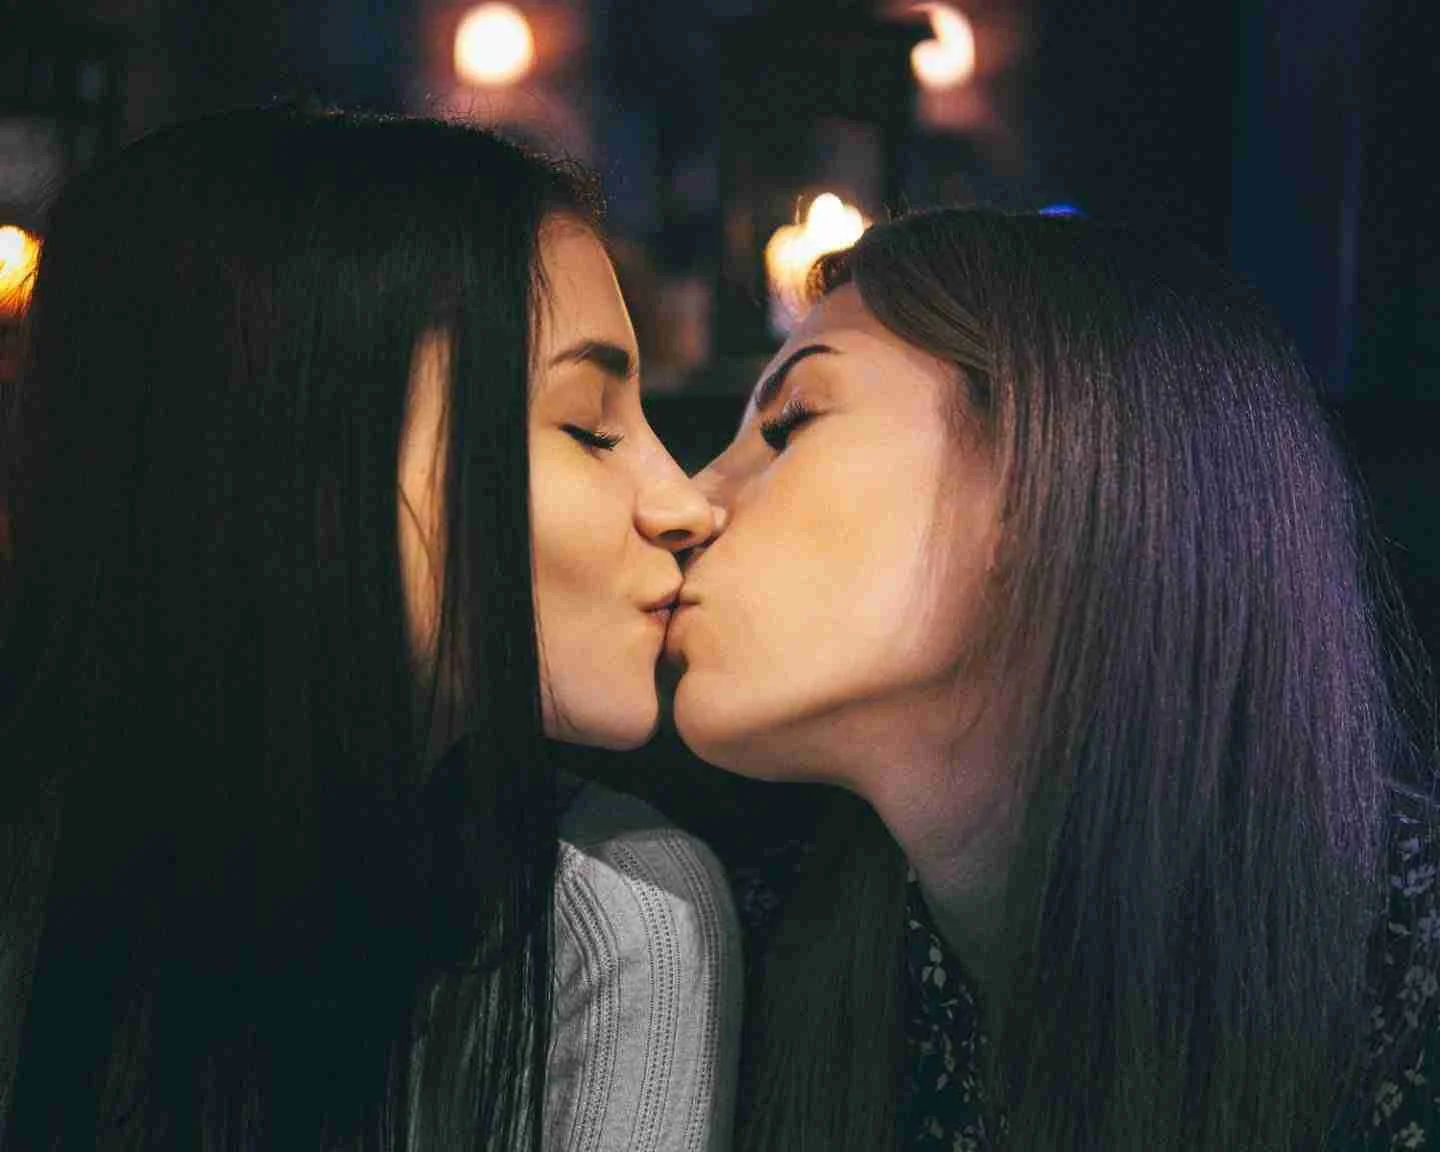 Your Ultimate Guide To Lesbian Bars & Nightlife Hotspots in Paris